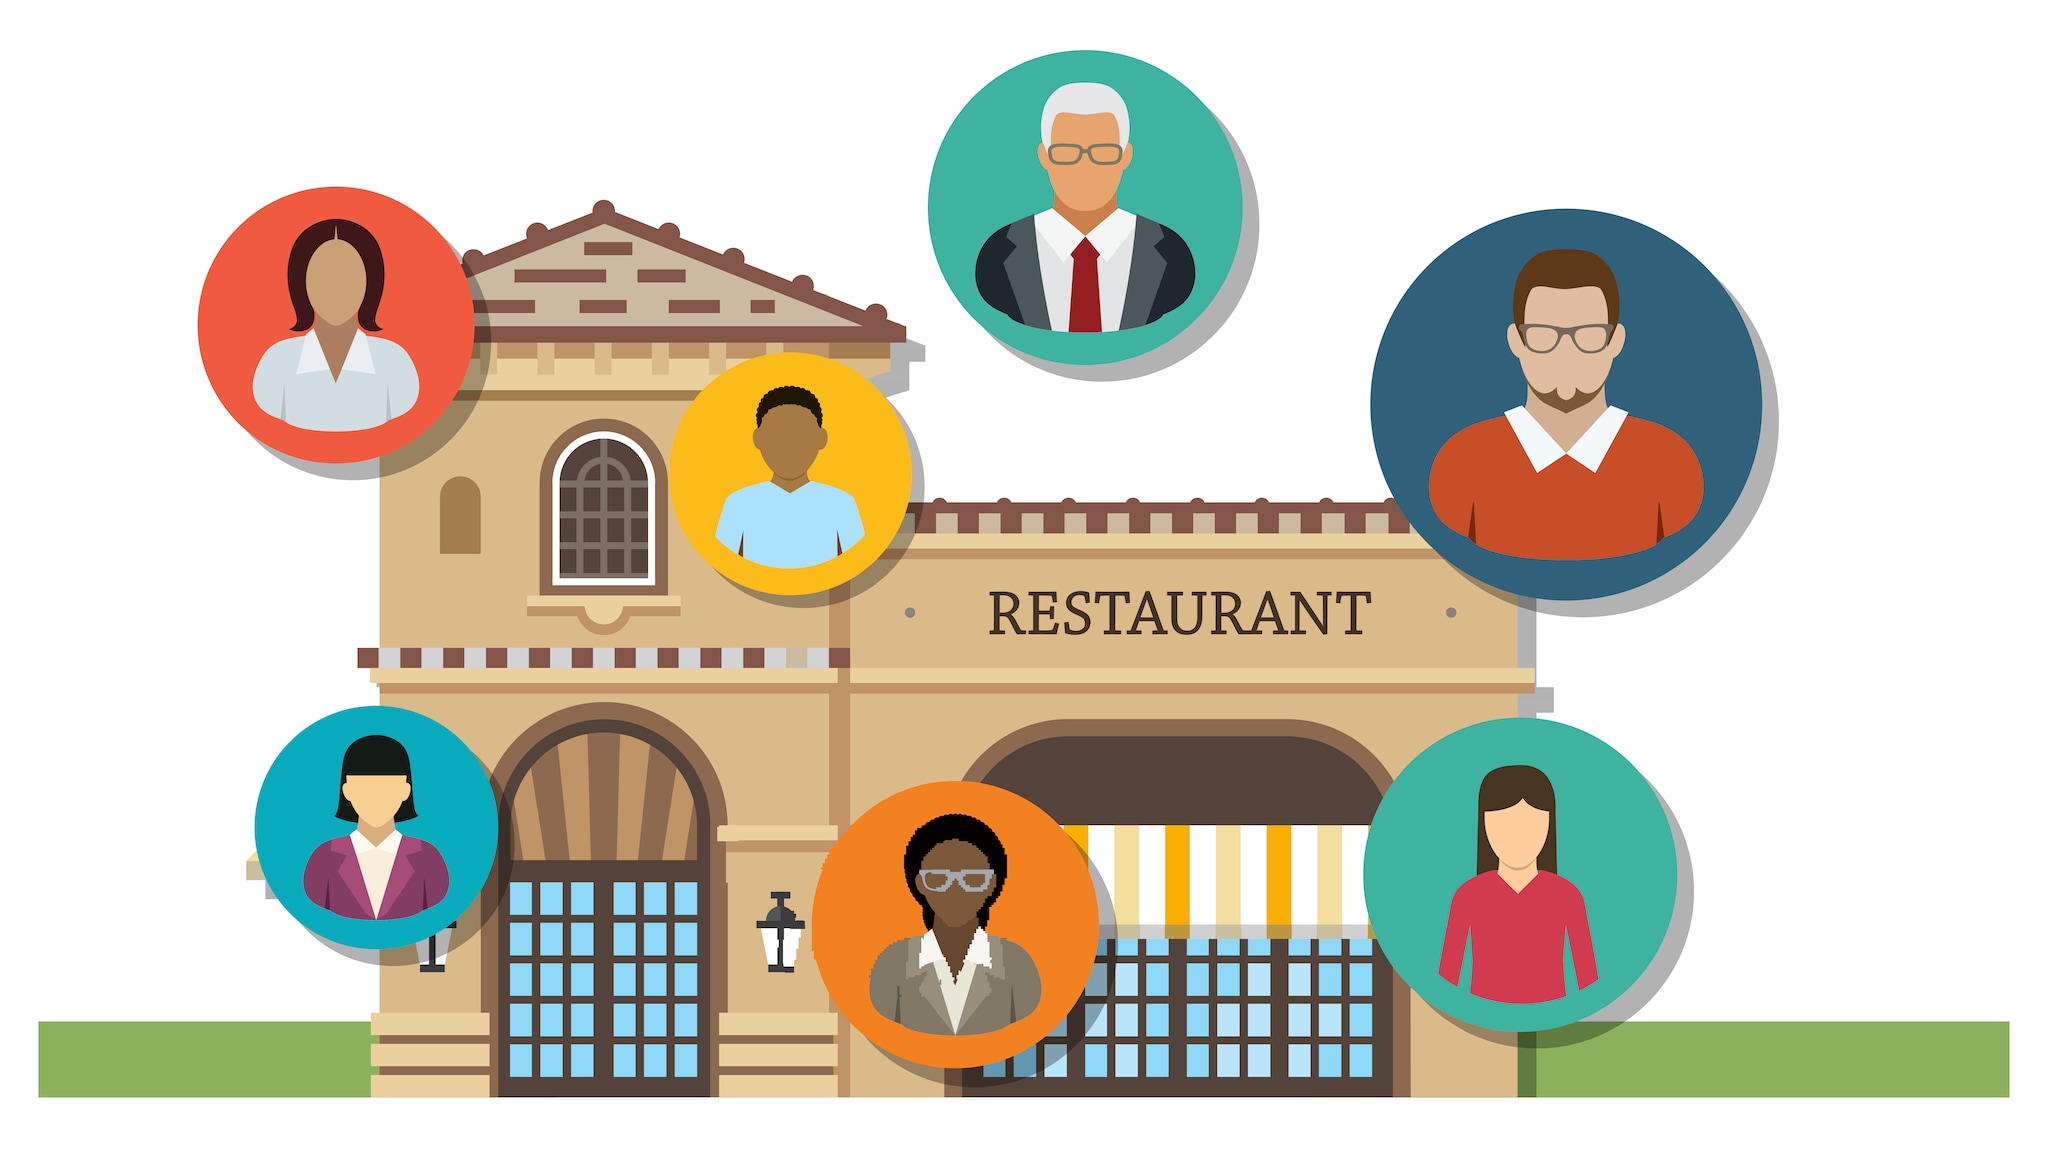 Image shows an illustration of a restaurant with 7 different colored circles around it. Each circle has the face of a person.